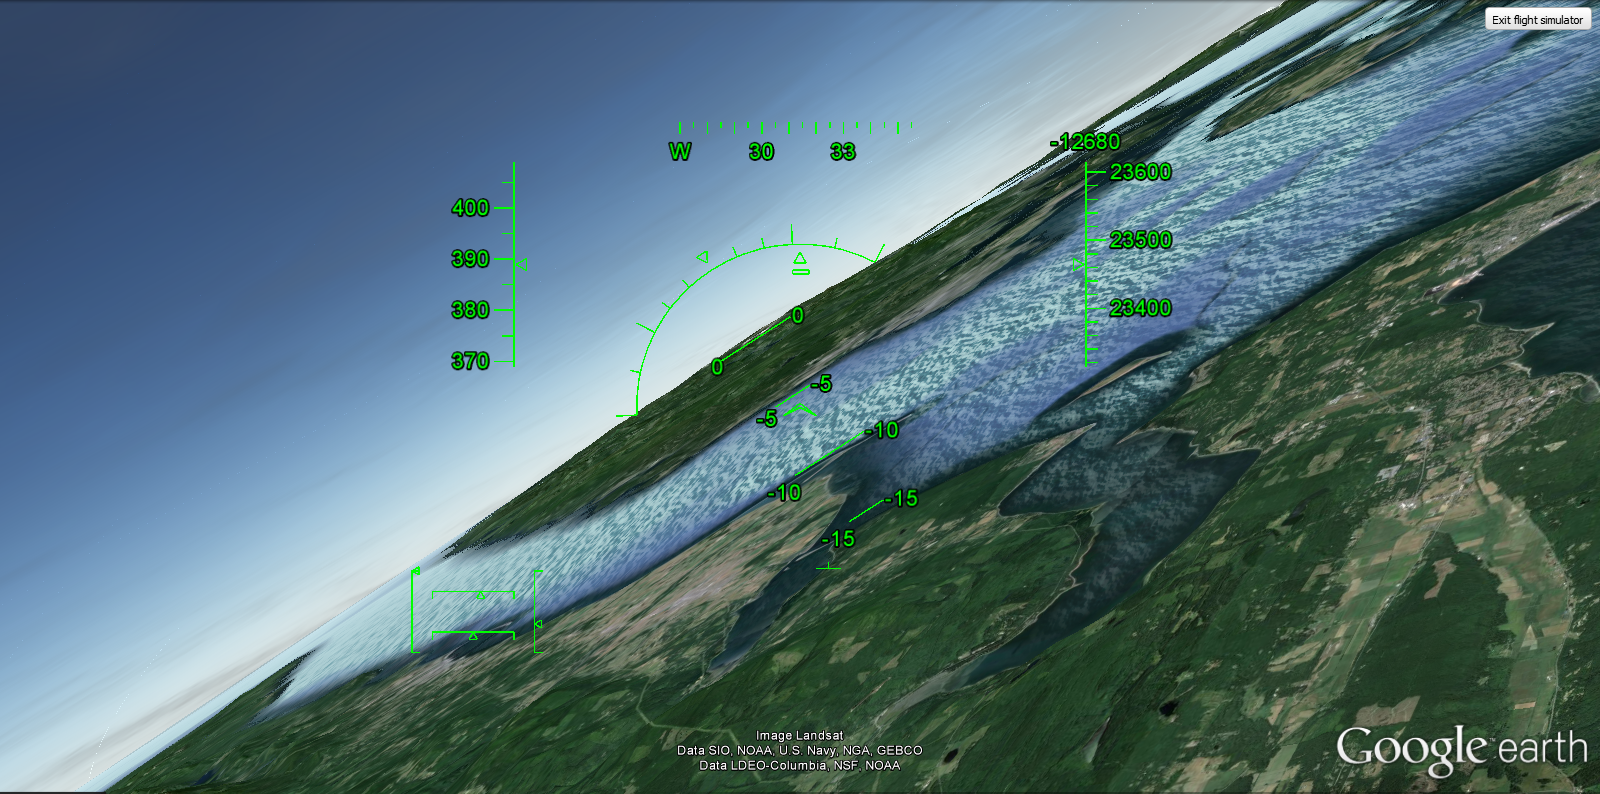 Google Earth's Flight Simulator to Fly Like a Pilot From Home